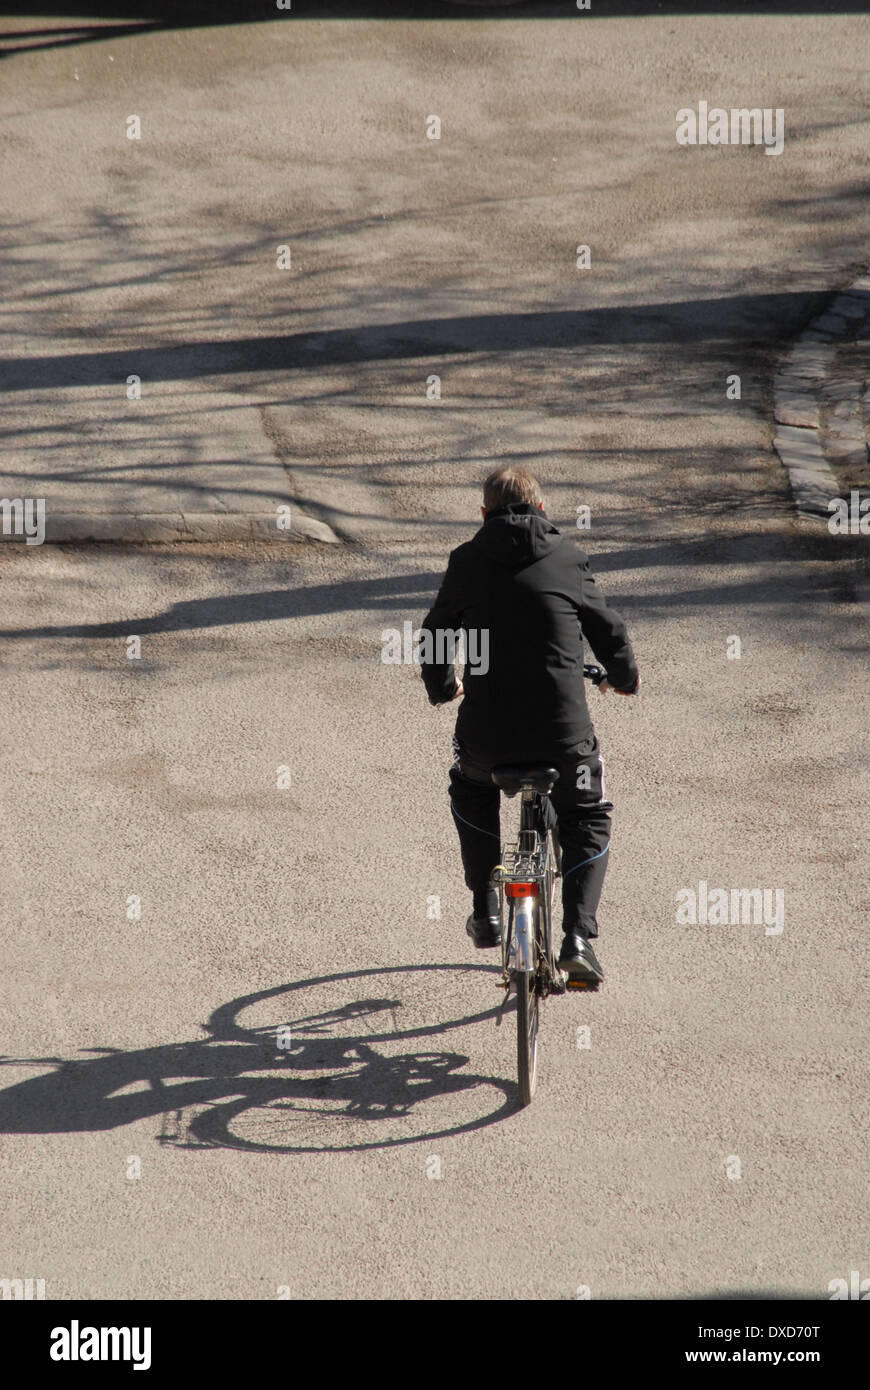 Man dressed all in black riding a bike. Stock Photo